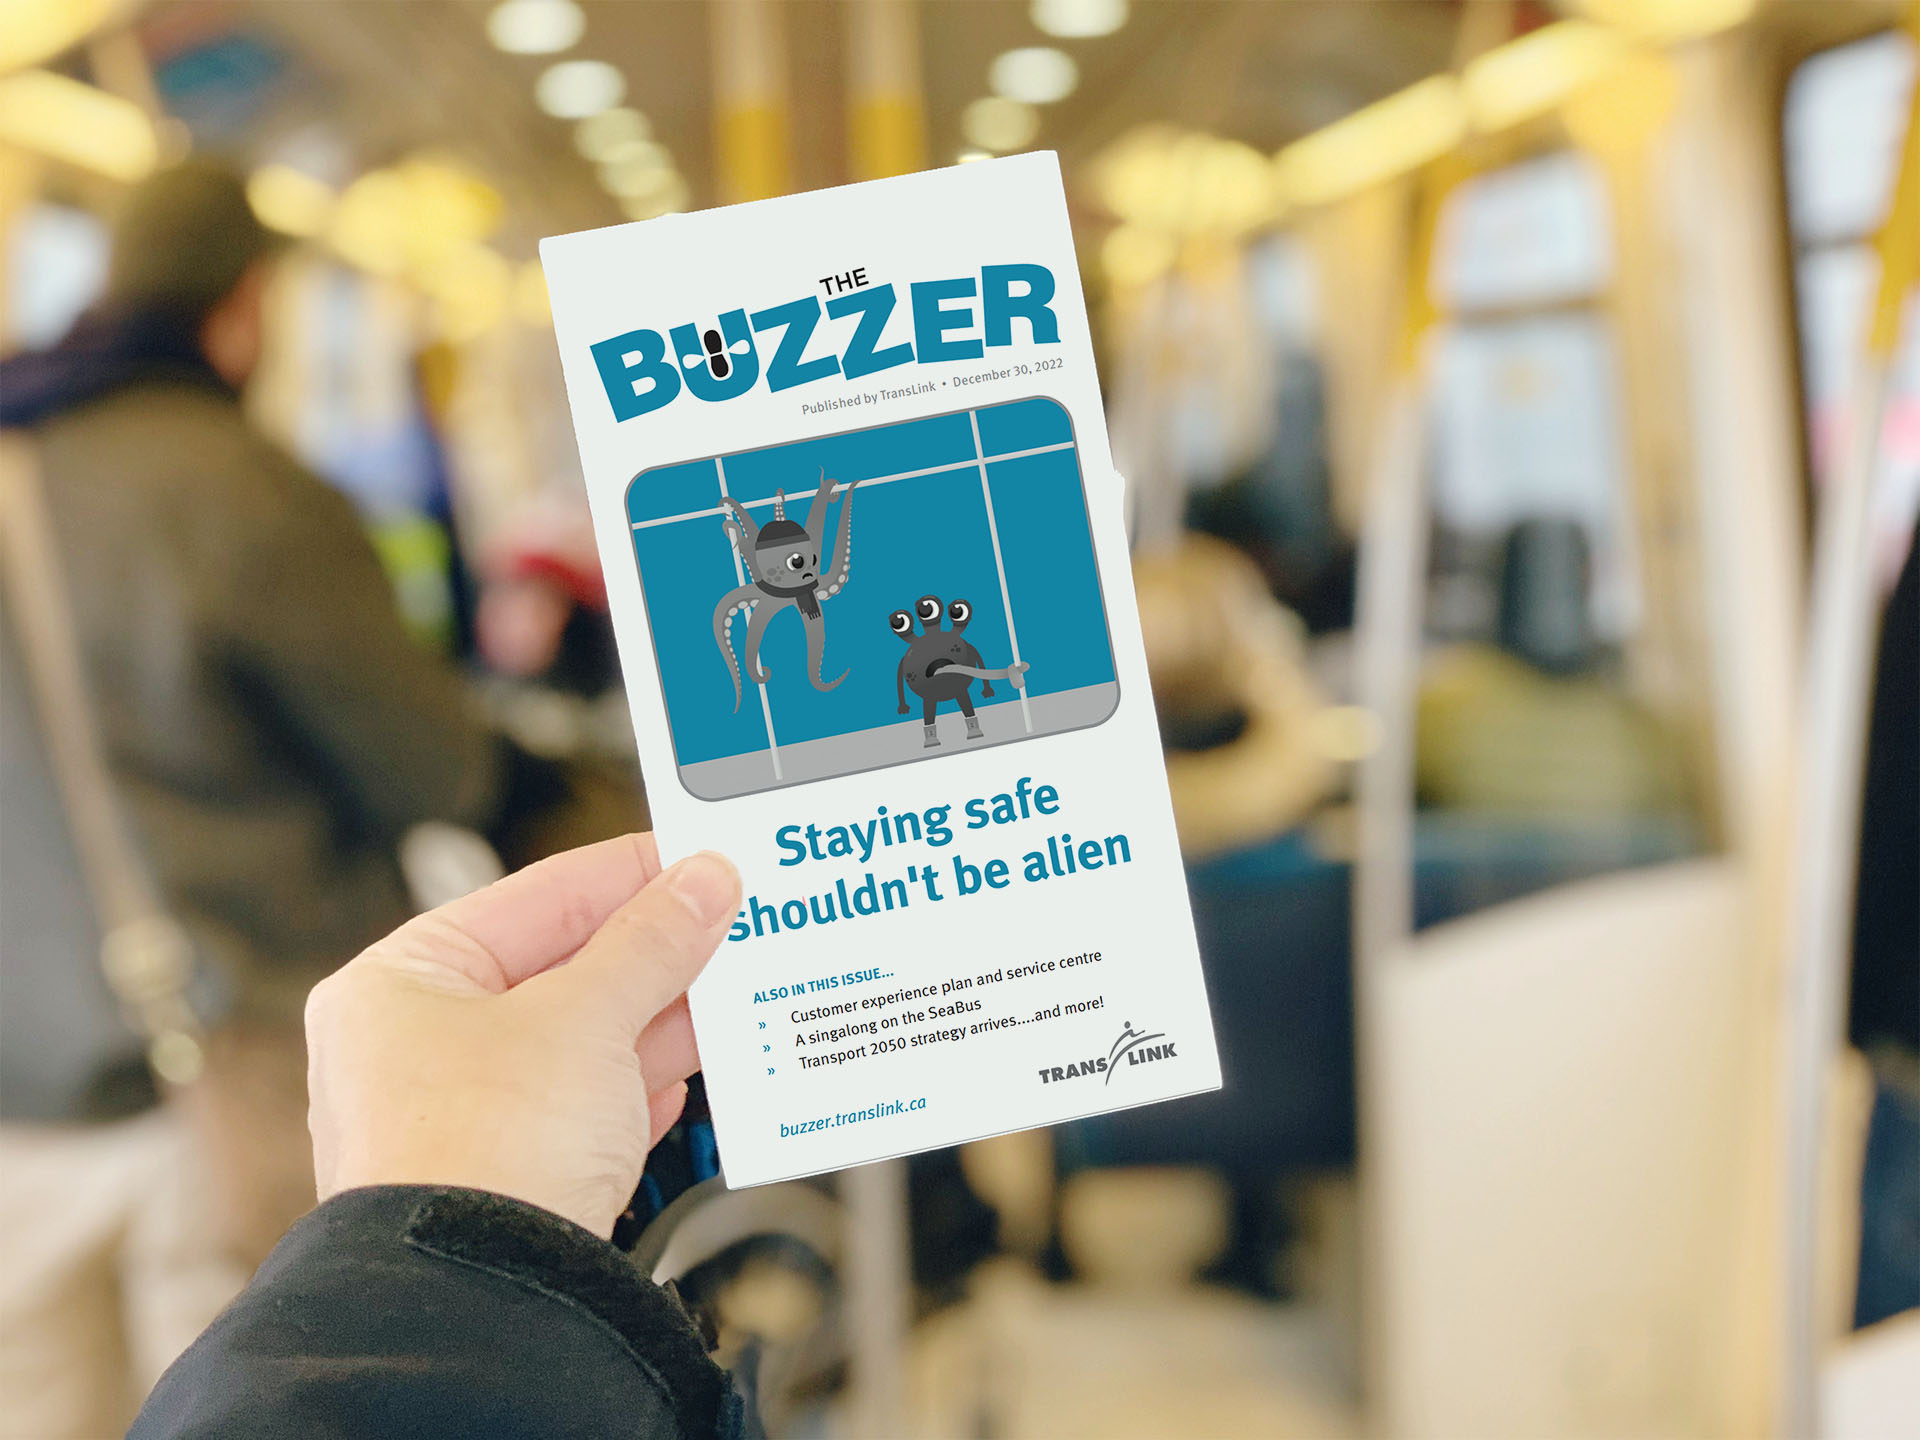 Rendering of a person holding an issue of The Buzzer on the SkyTrain